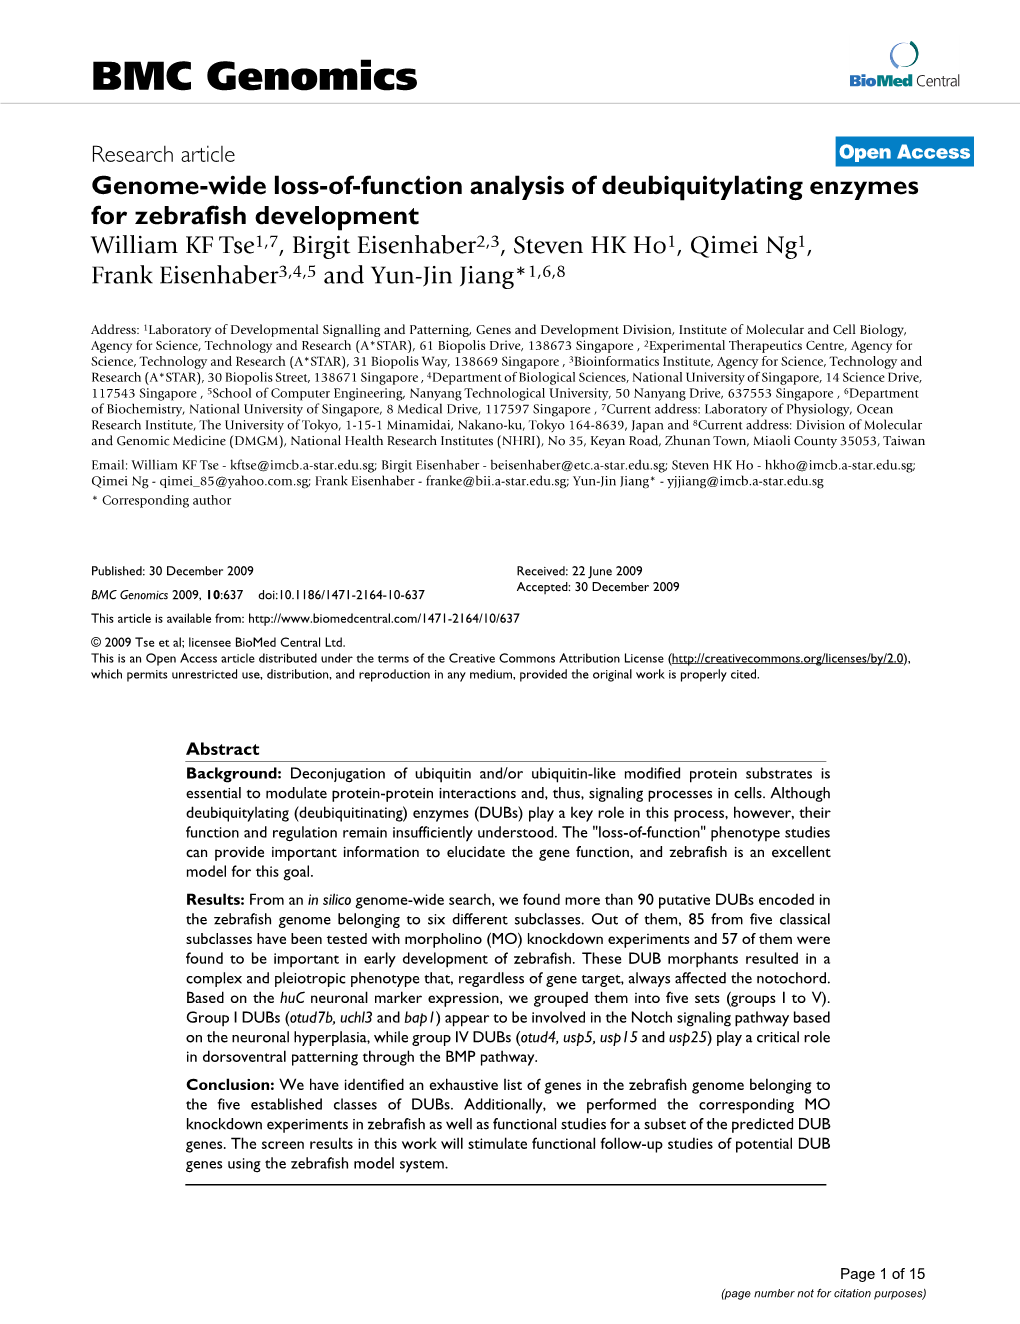 Genome-Wide Loss-Of-Function Analysis of Deubiquitylating